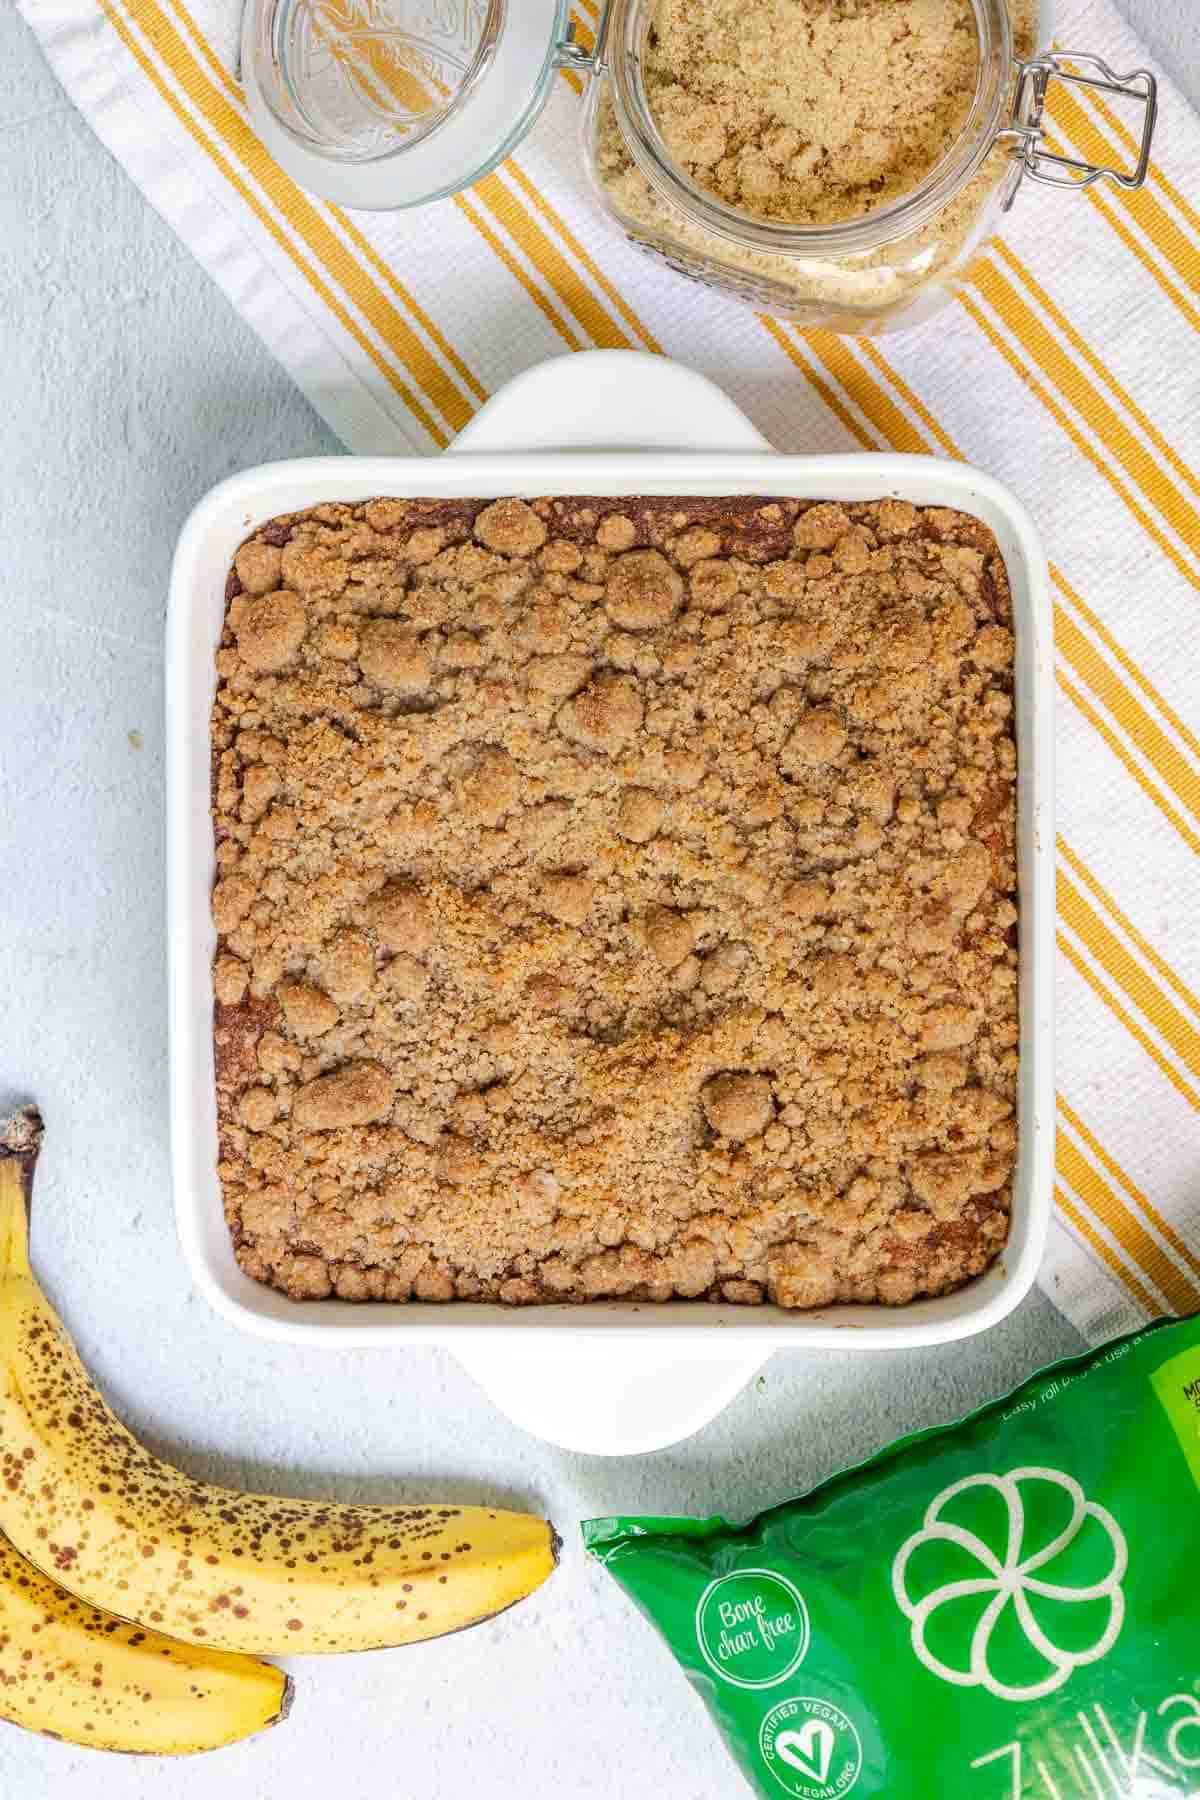 Banana Coffee Cake baked until golden brown